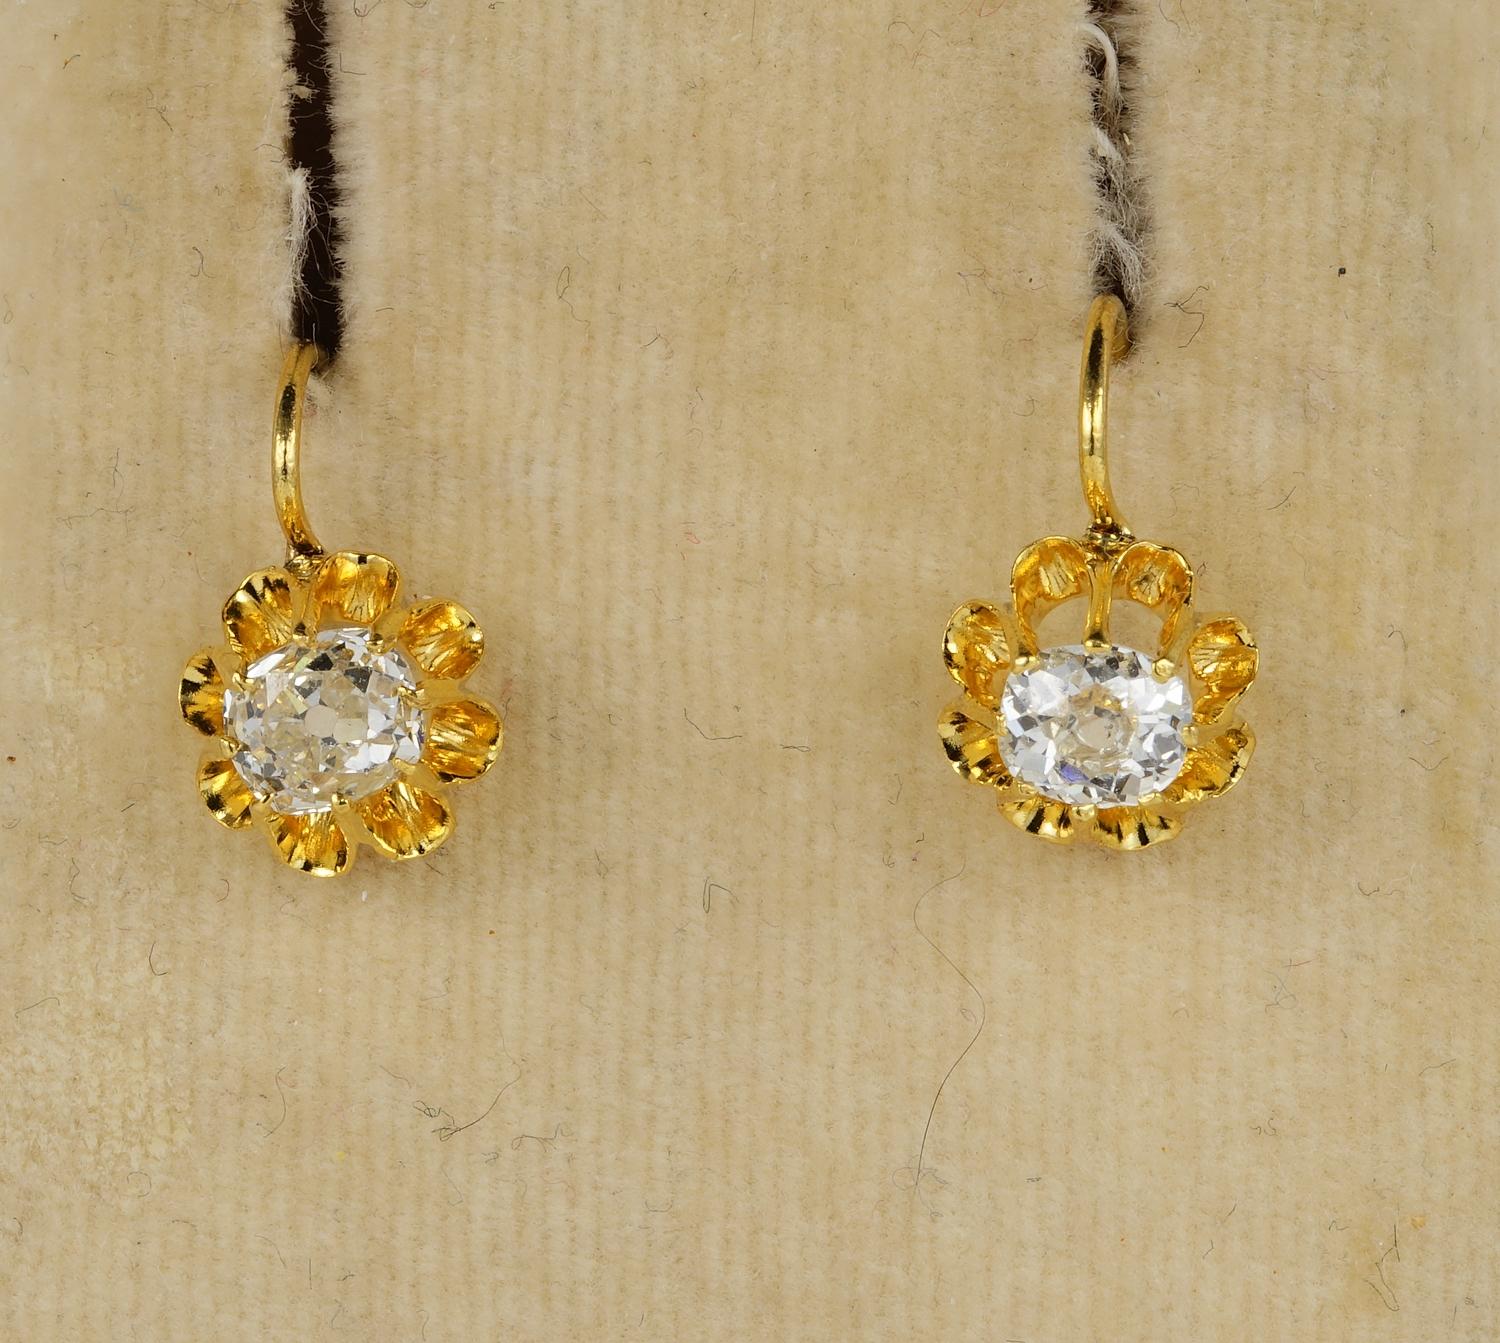 Victorian Glistening Diamonds!
These outstanding quality Victorian Diamond earrings are the very best to wear all day long
Rare, authentic, so scarce, especially of this top quality
Hunted worldwide by dealers and collectors
Gorgeous buttercup mount